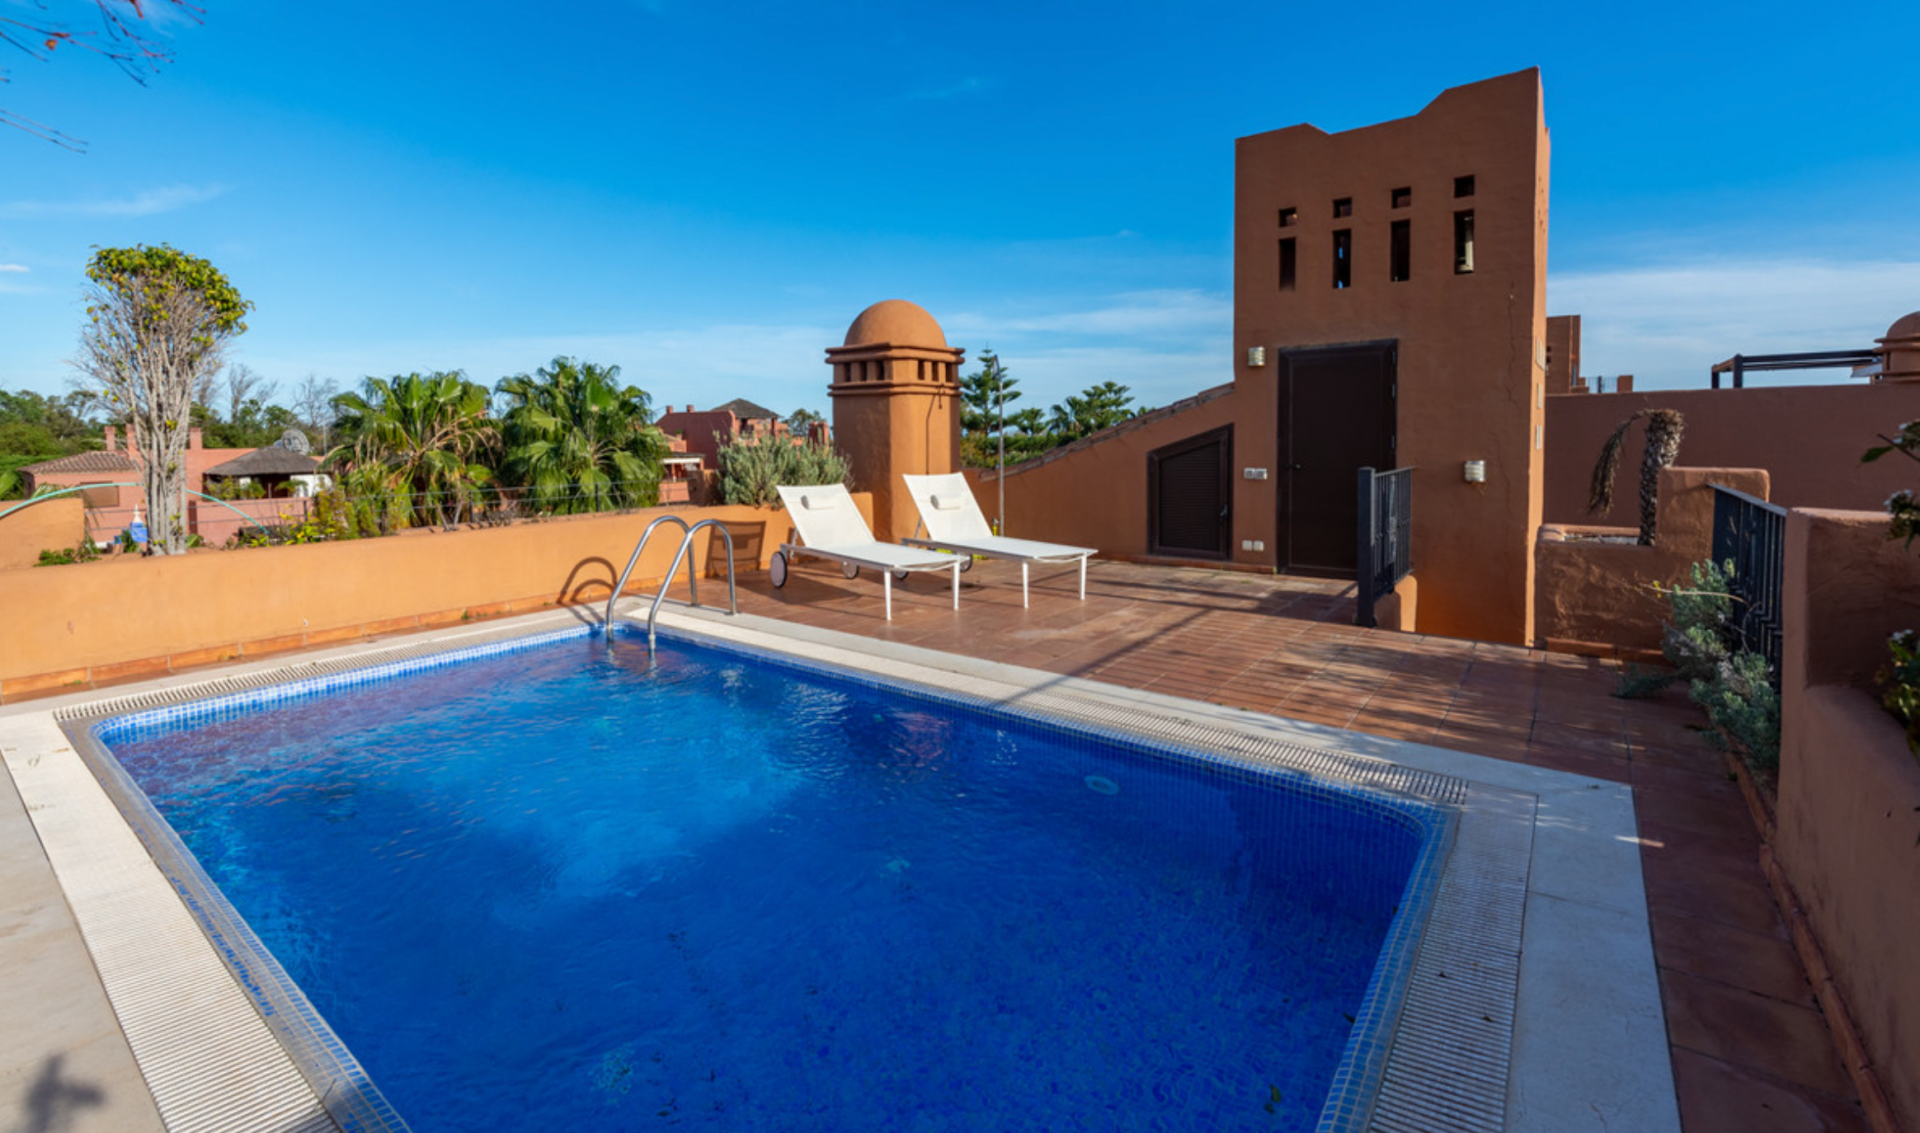 Large, bright, four bedroom penthouse apartment in a perfectly presented and secure beachside urbanisation in Casasola